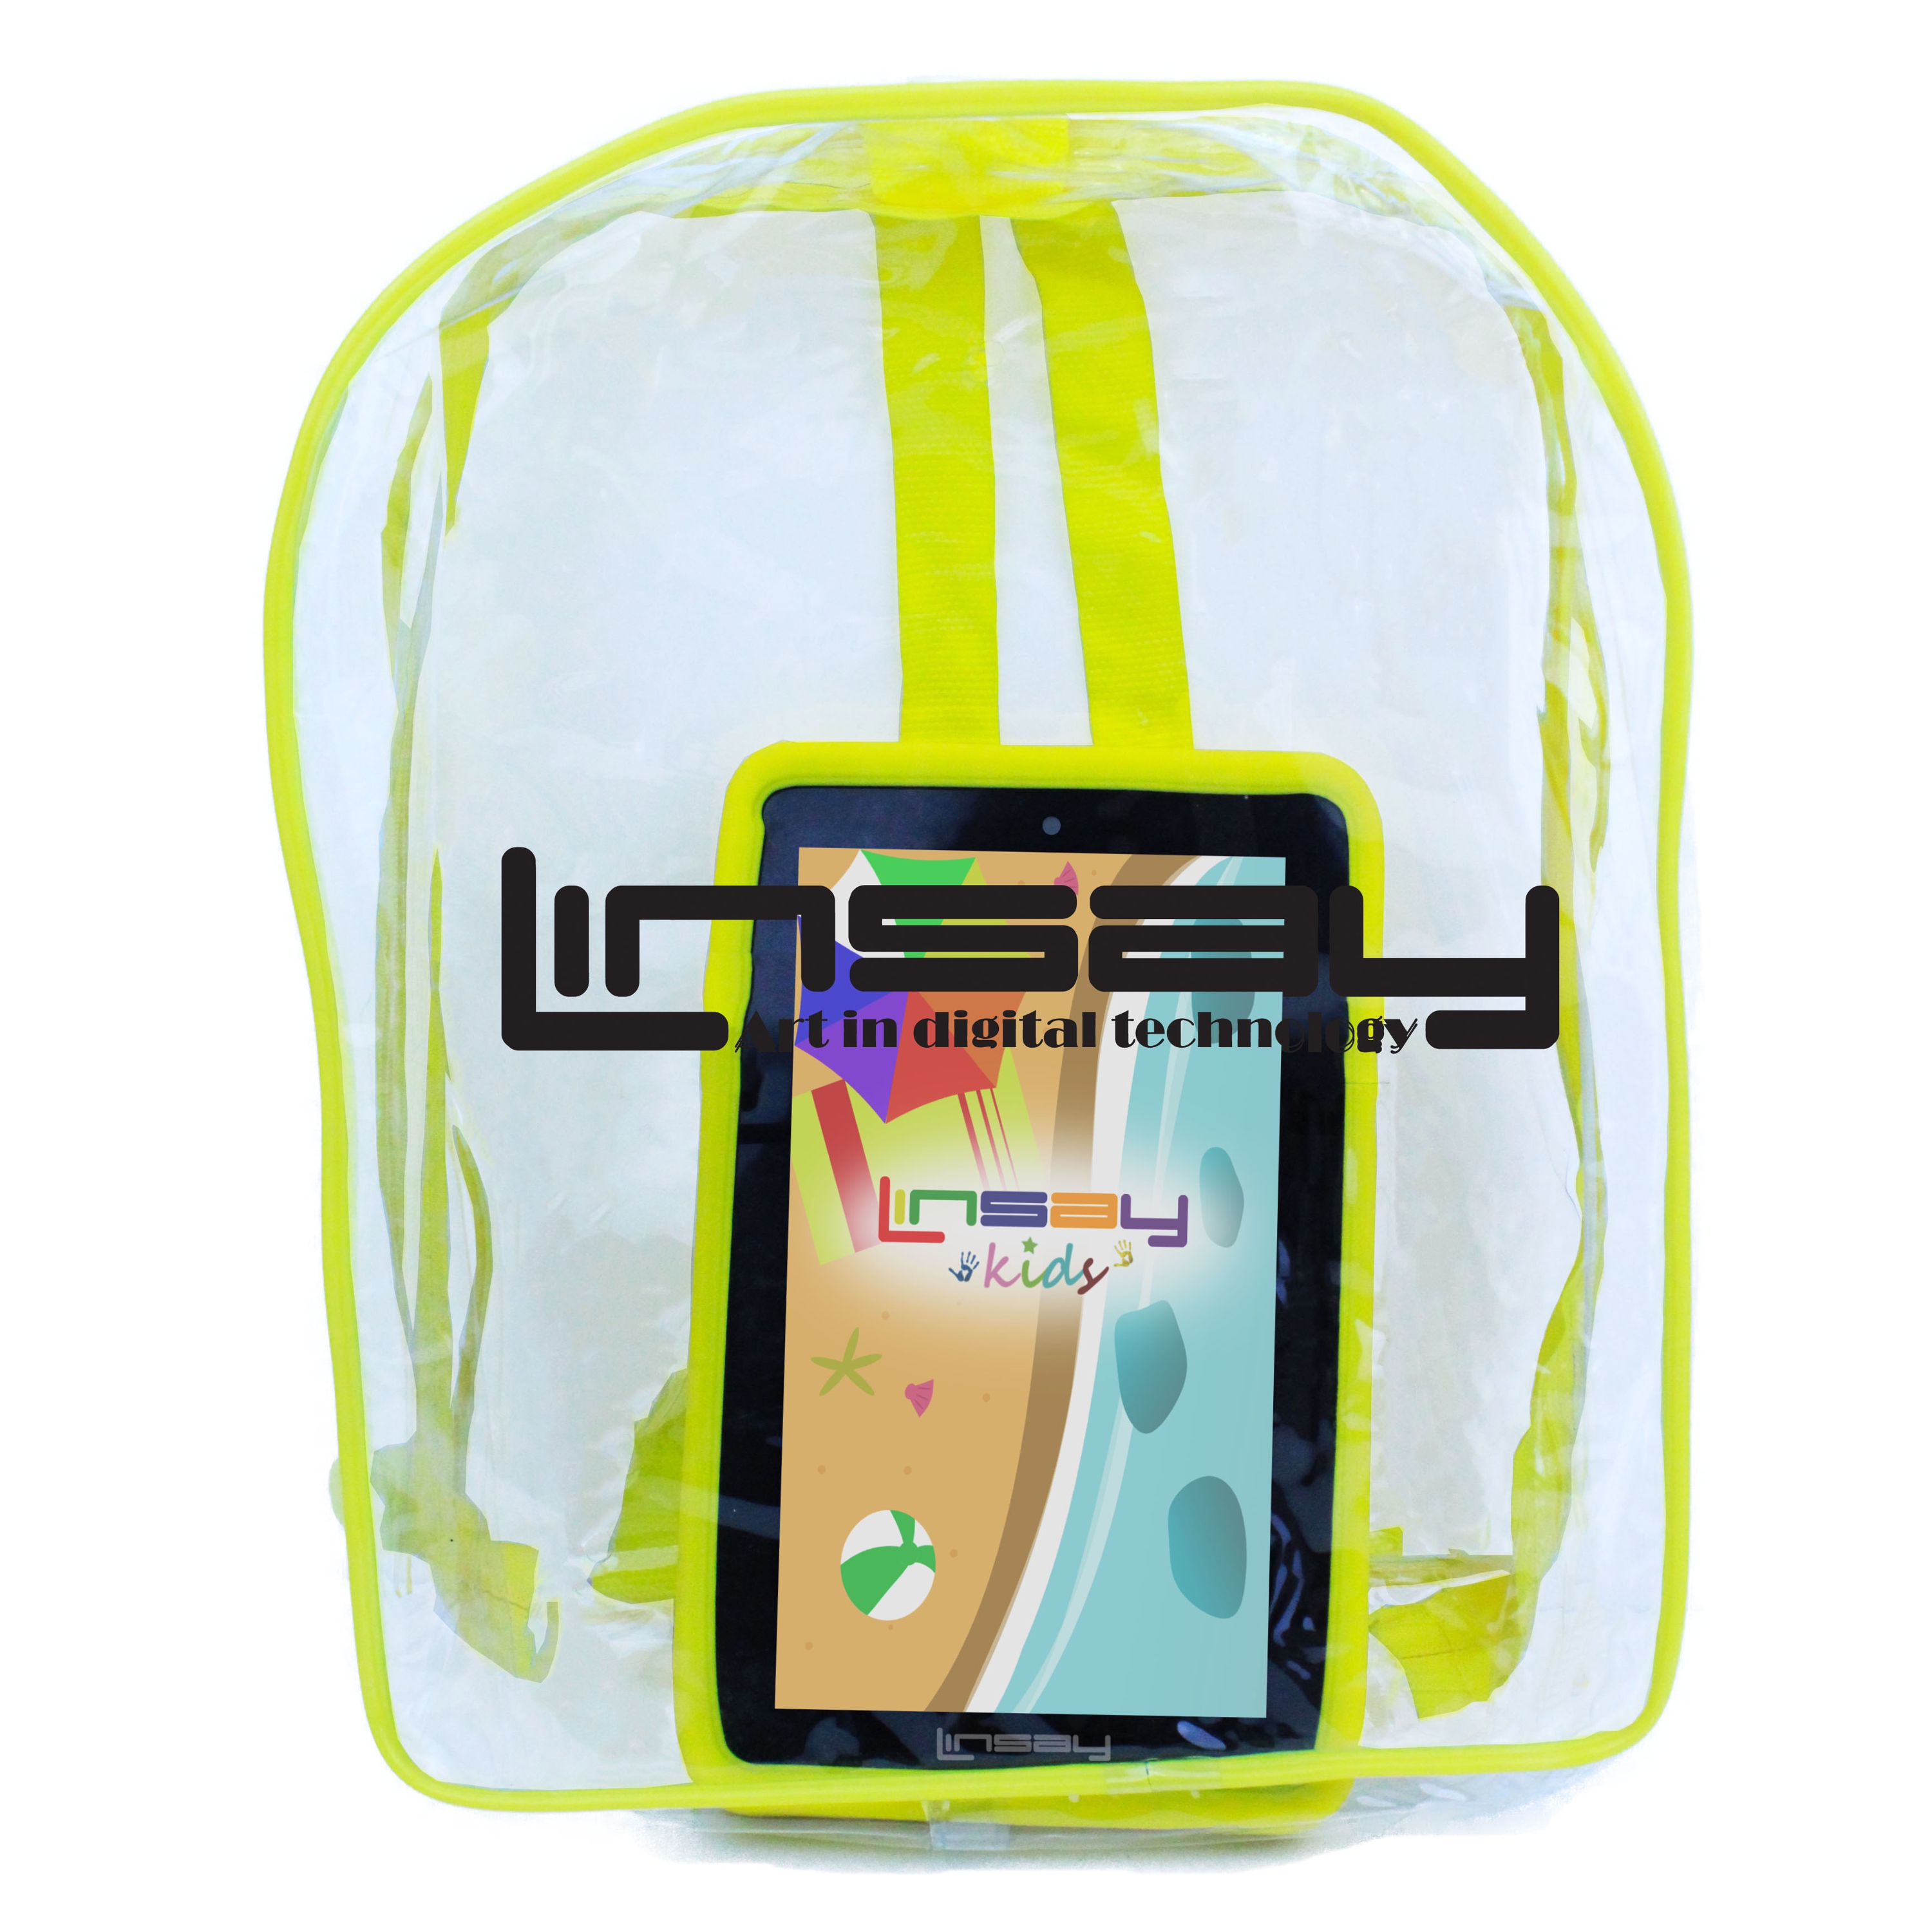 LINSAY 7" Kids Tablet 64GB Android 13 Wi-Fi  Camera, Apps, Games, Learning Tab for Children with Yellow Kid Defender Case and Backpack - image 1 of 3